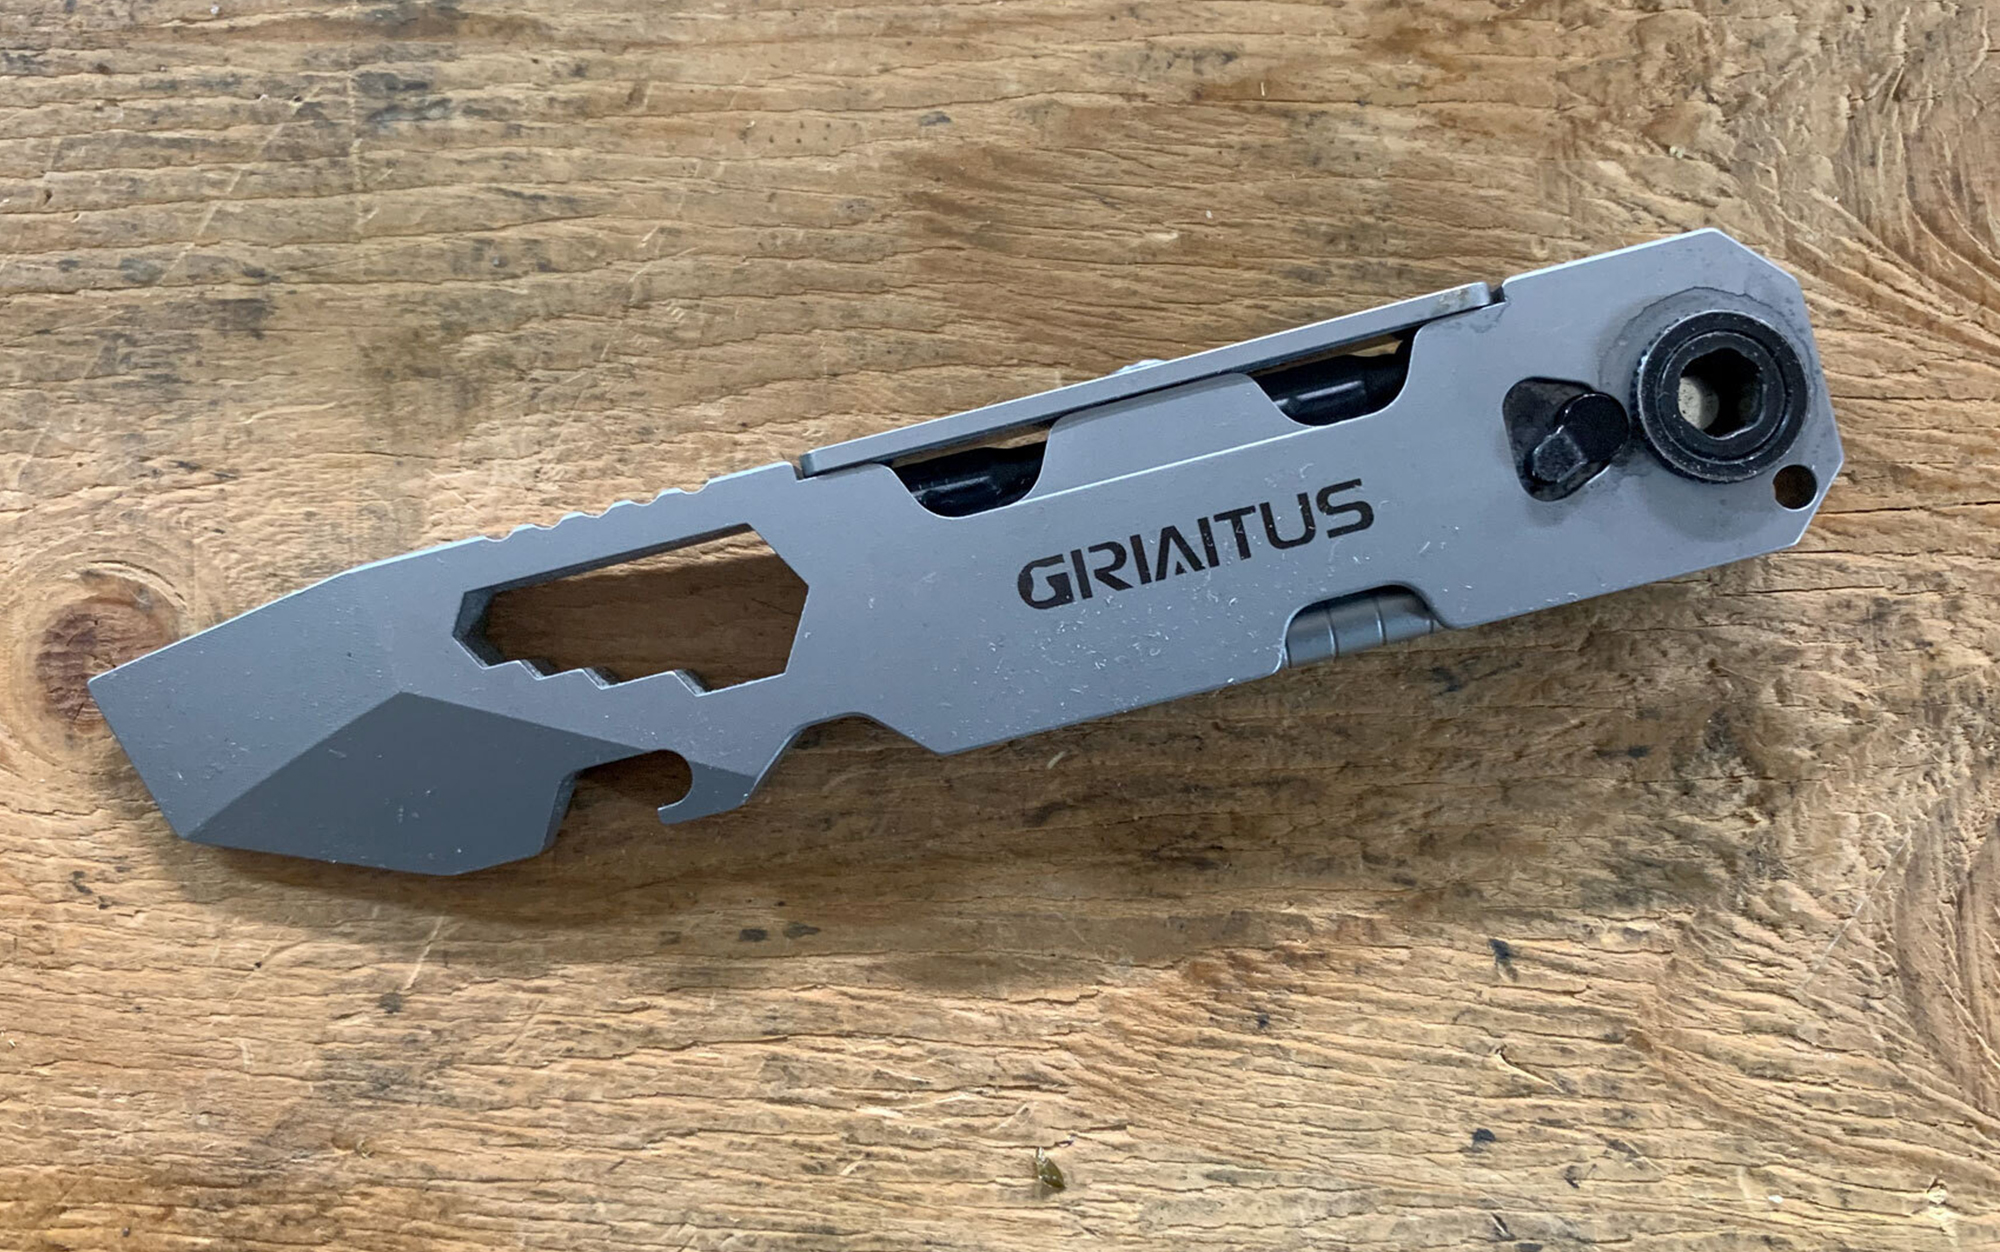 We tested the Griaitus Multitool Pry Bar.